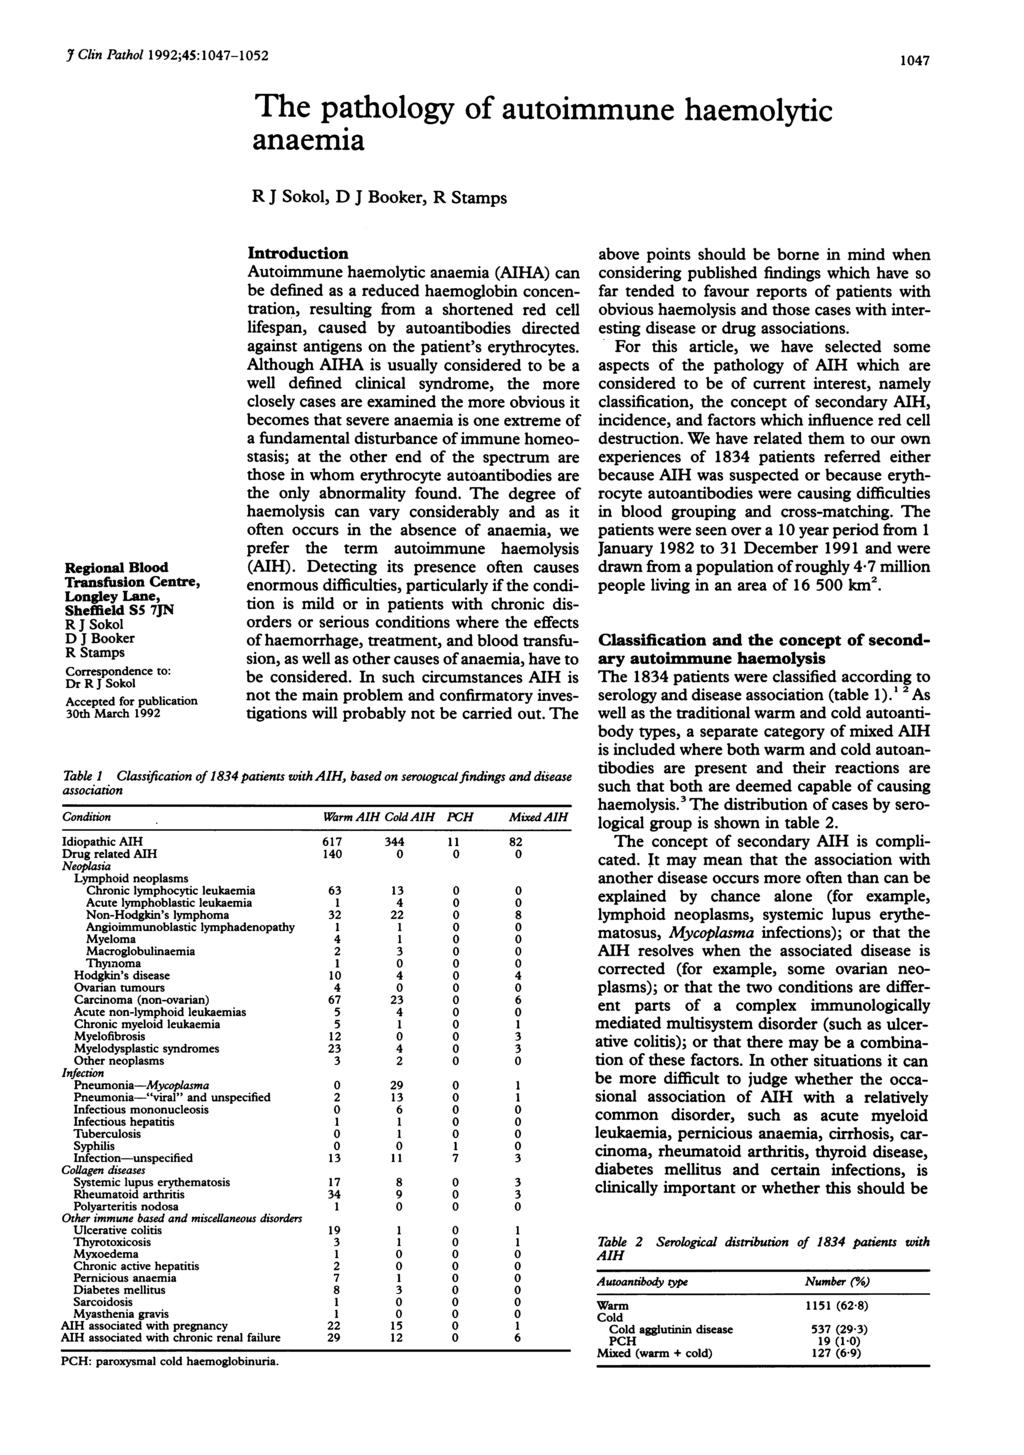 J Clin Pathol 1992;45:1047-1052 The pathology of autoimmune haemolytic anaemia R J Sokol, D J Booker, R Stamps Introduction Autoimmune haemolytic anaemia (AIHA) can be defined as a reduced